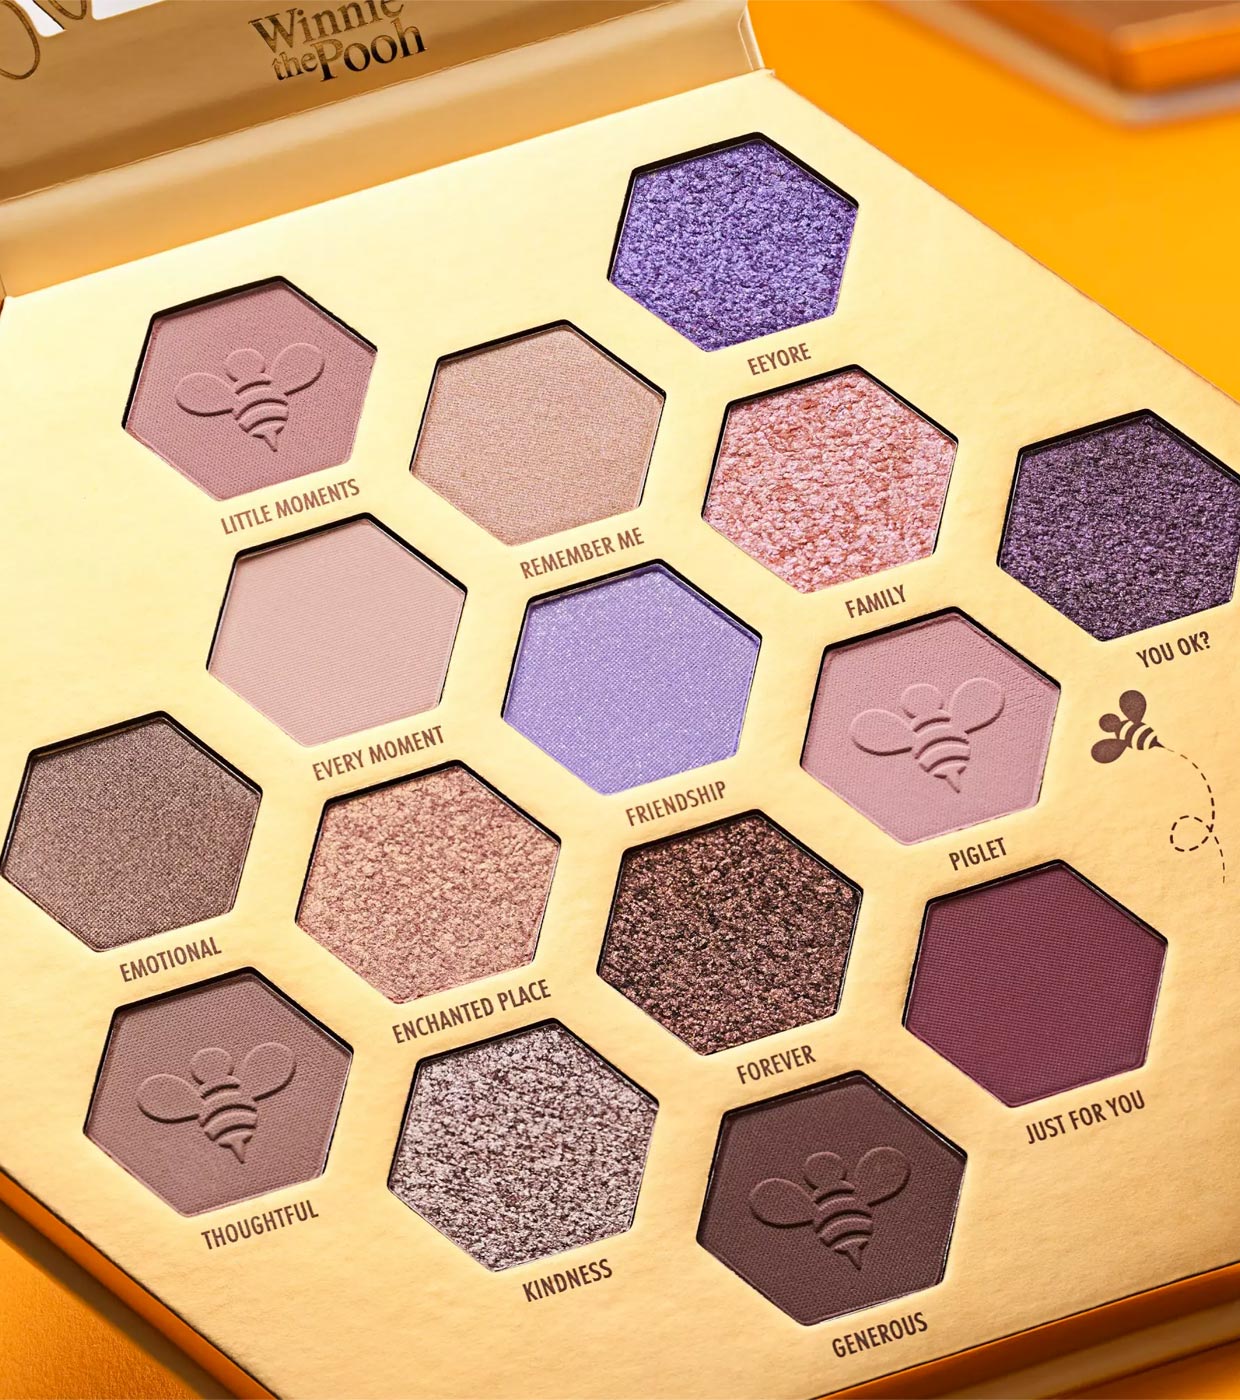 Palette Friends the Other | *Winnie Buy - Maquillalia Up - Each - Pooh* 020: Catrice Eyeshadow Lift